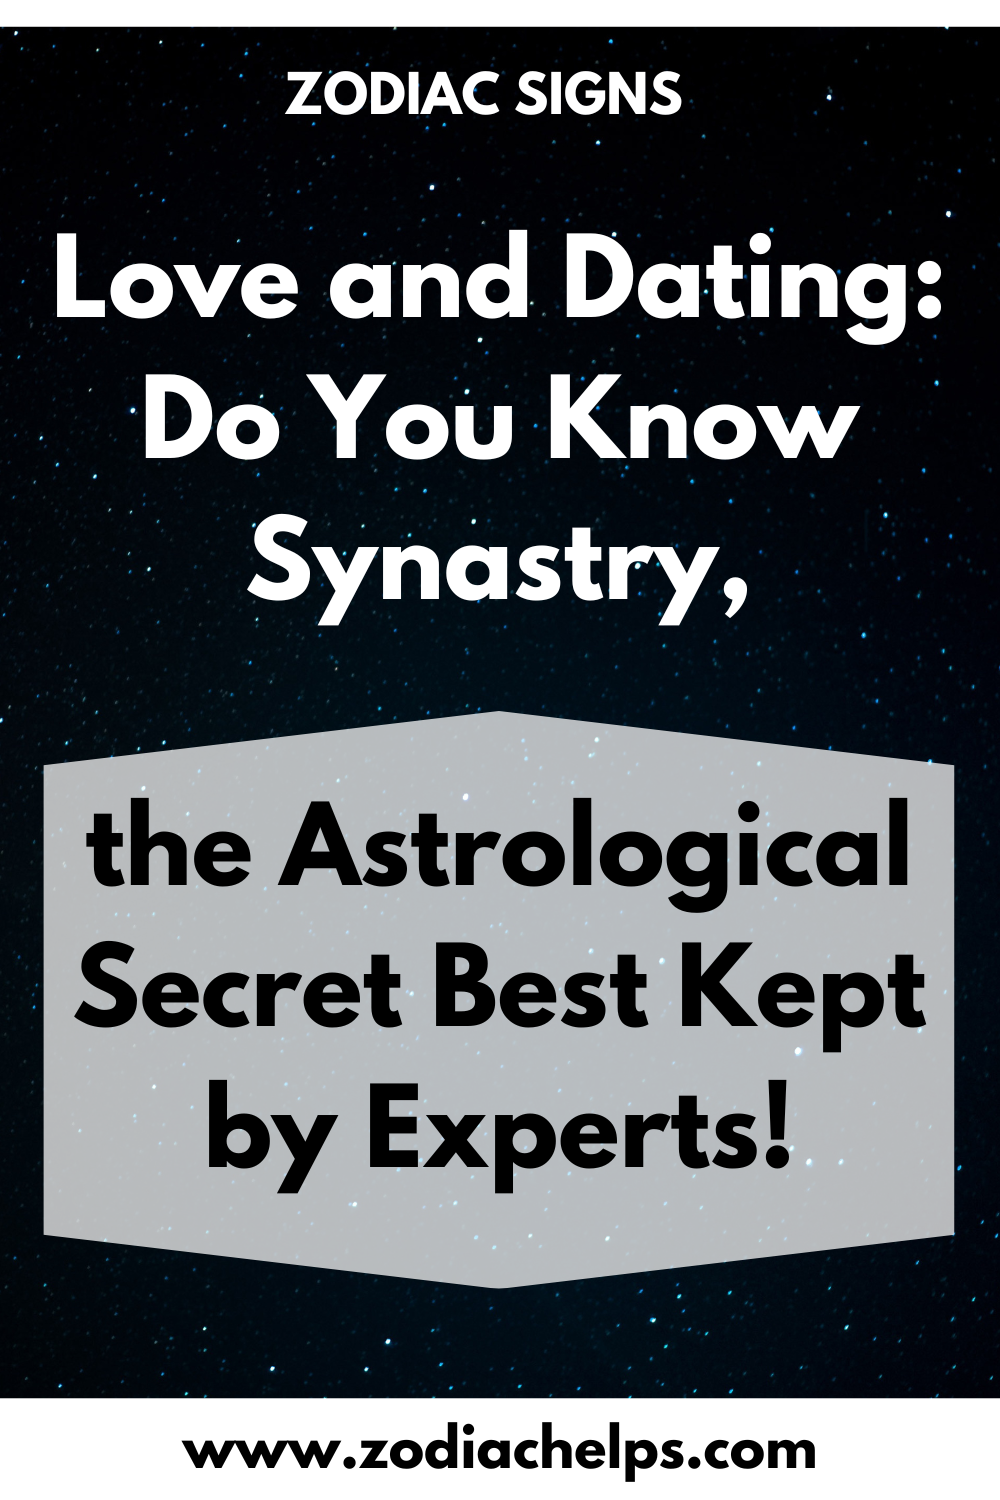 Love and Dating Do You Know Synastry, the Astrological Secret Best Kept by Experts!